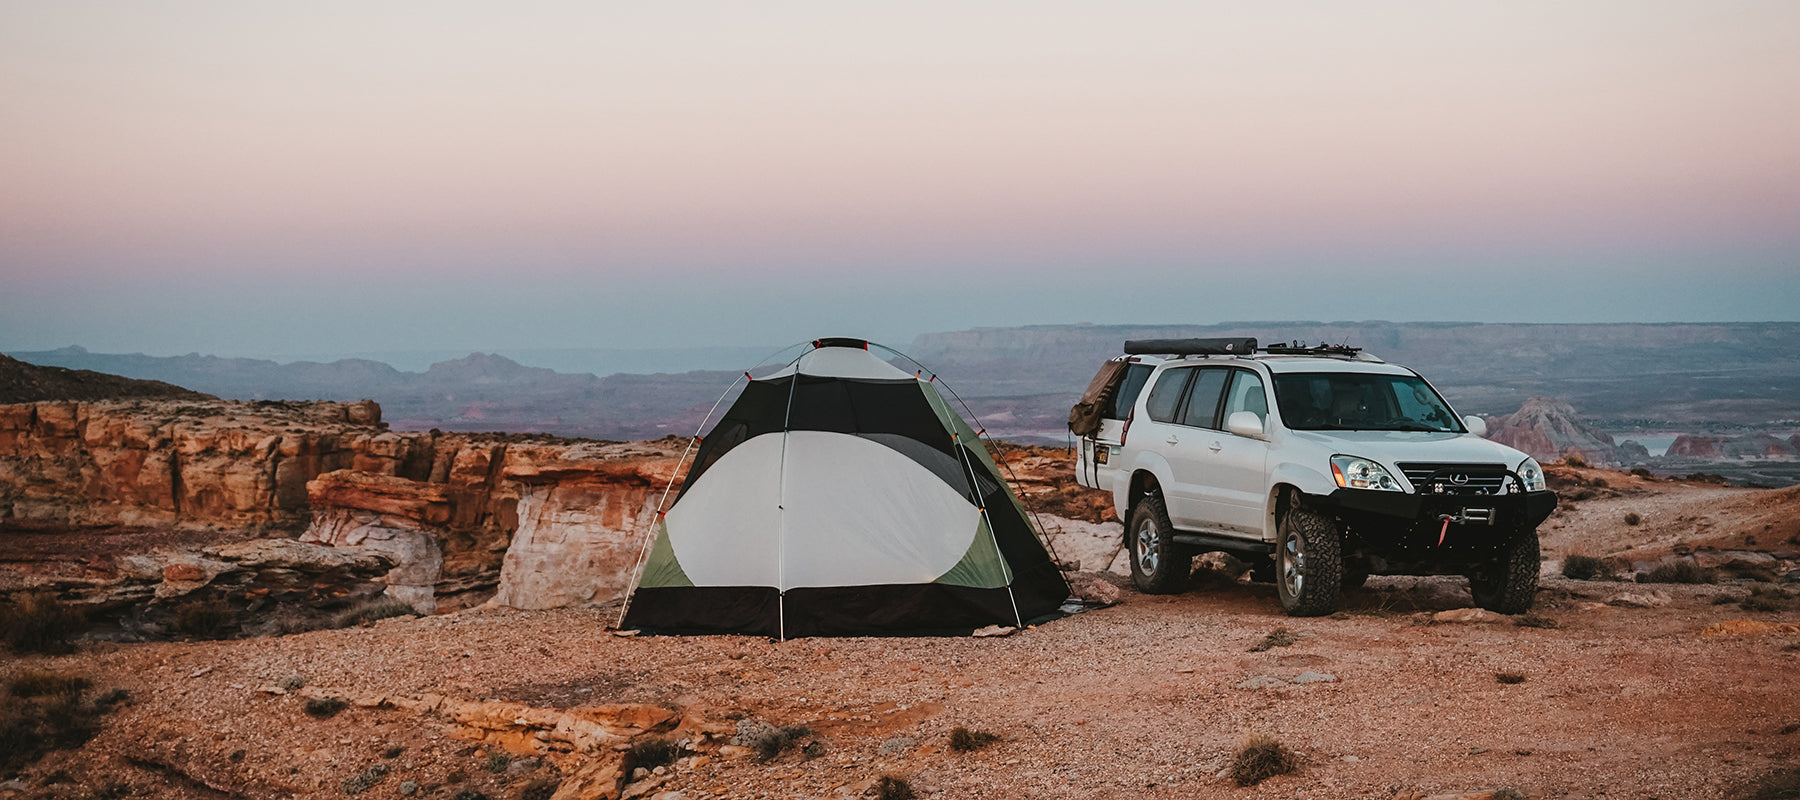 5 Destinations to Extend your Camping Season in the United States